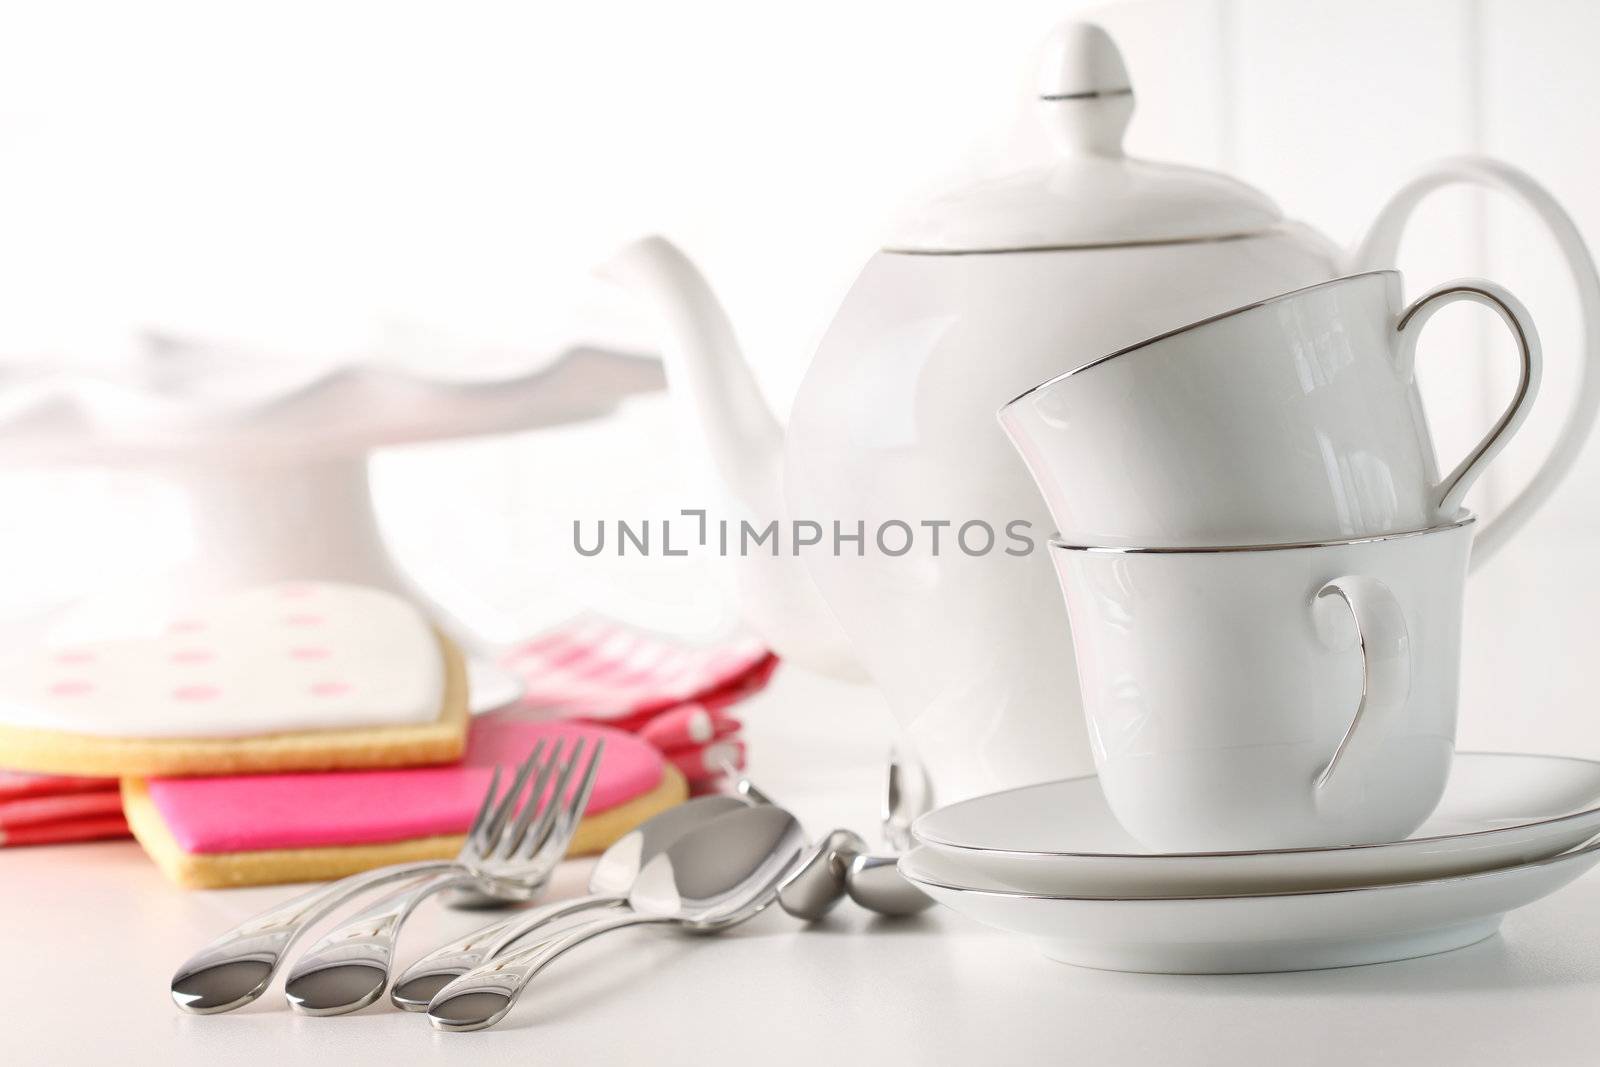 Porcelain teapot with cups and valentine cookies in background